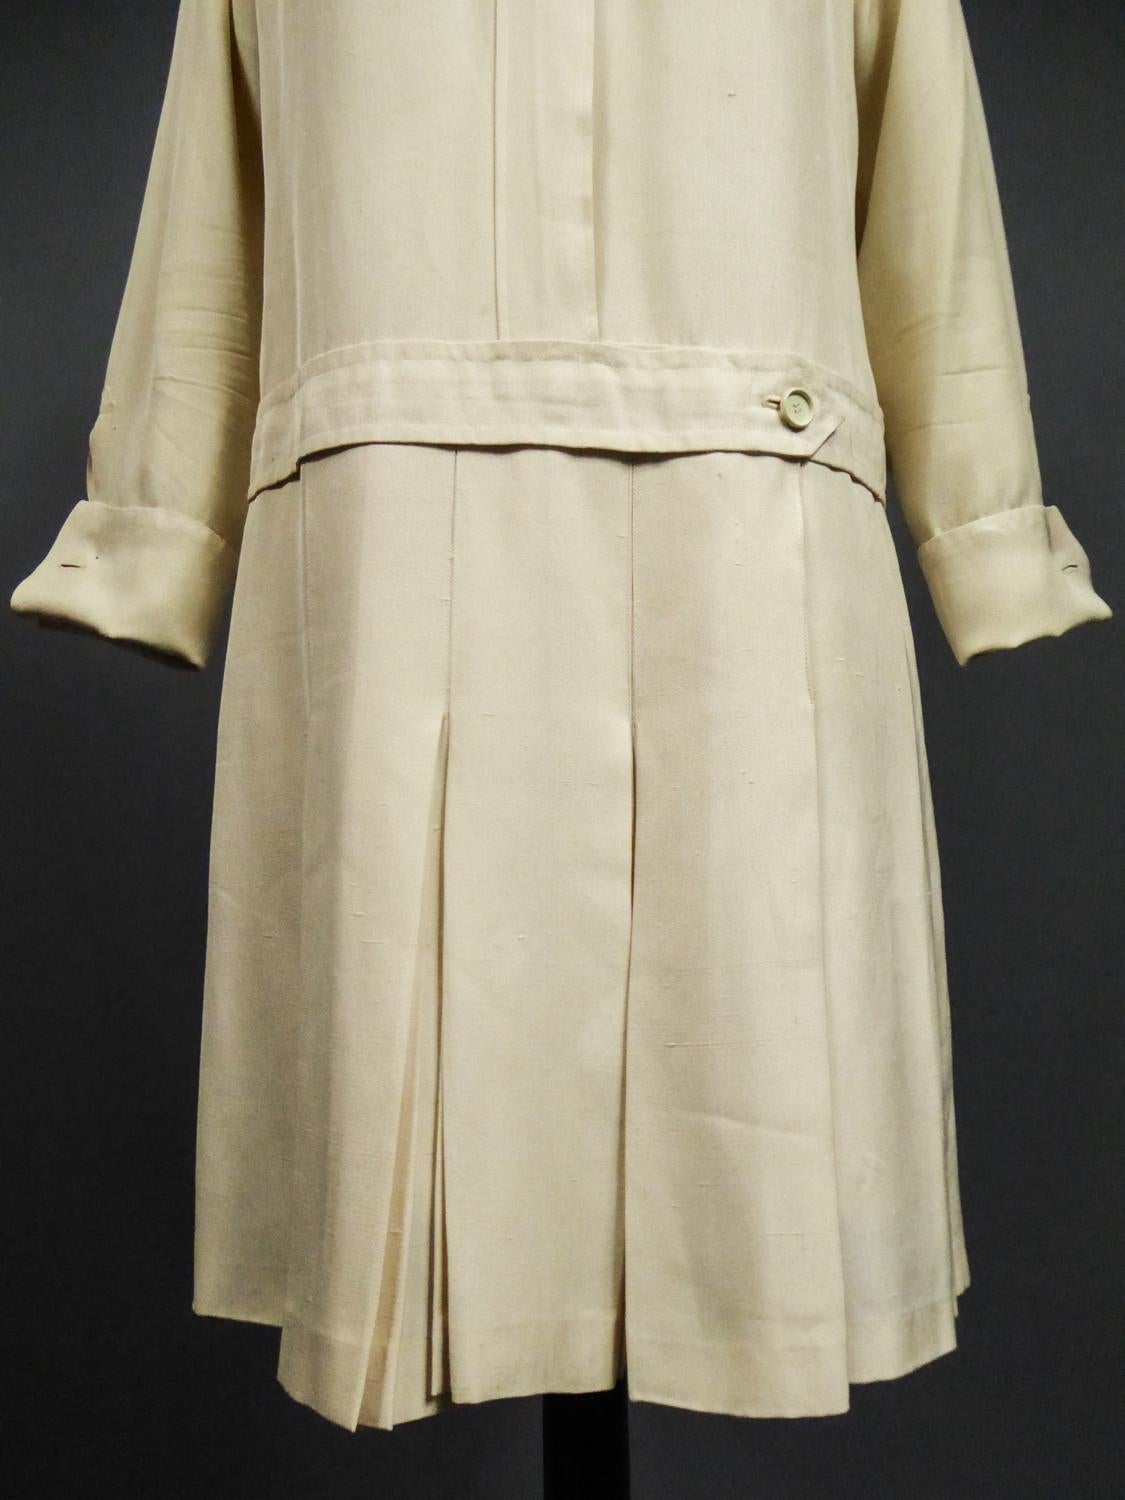 An Yves Saint Laurent Cocktail Dress Numbered 15193 - 1965 Collection 3